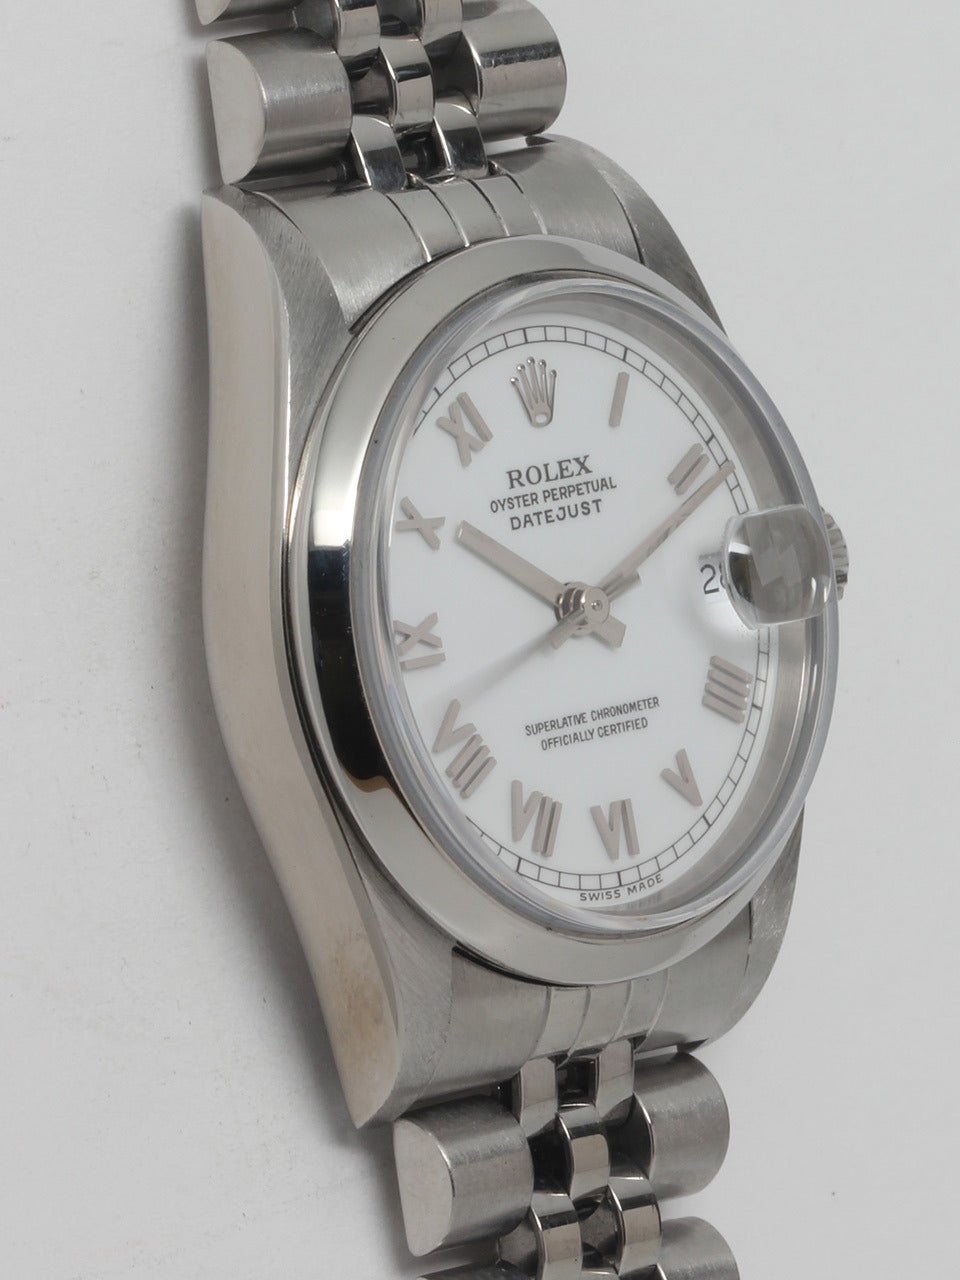 Rolex Stainless Steel Midsize Datejust Wristwatch ref 68240 serial #U5 circa 1997. 31mm diameter case with smooth bezel and sapphire crystal. White dial with applied silver thin Roman numerals and hands. Powered by self winding 2135 caliber movement